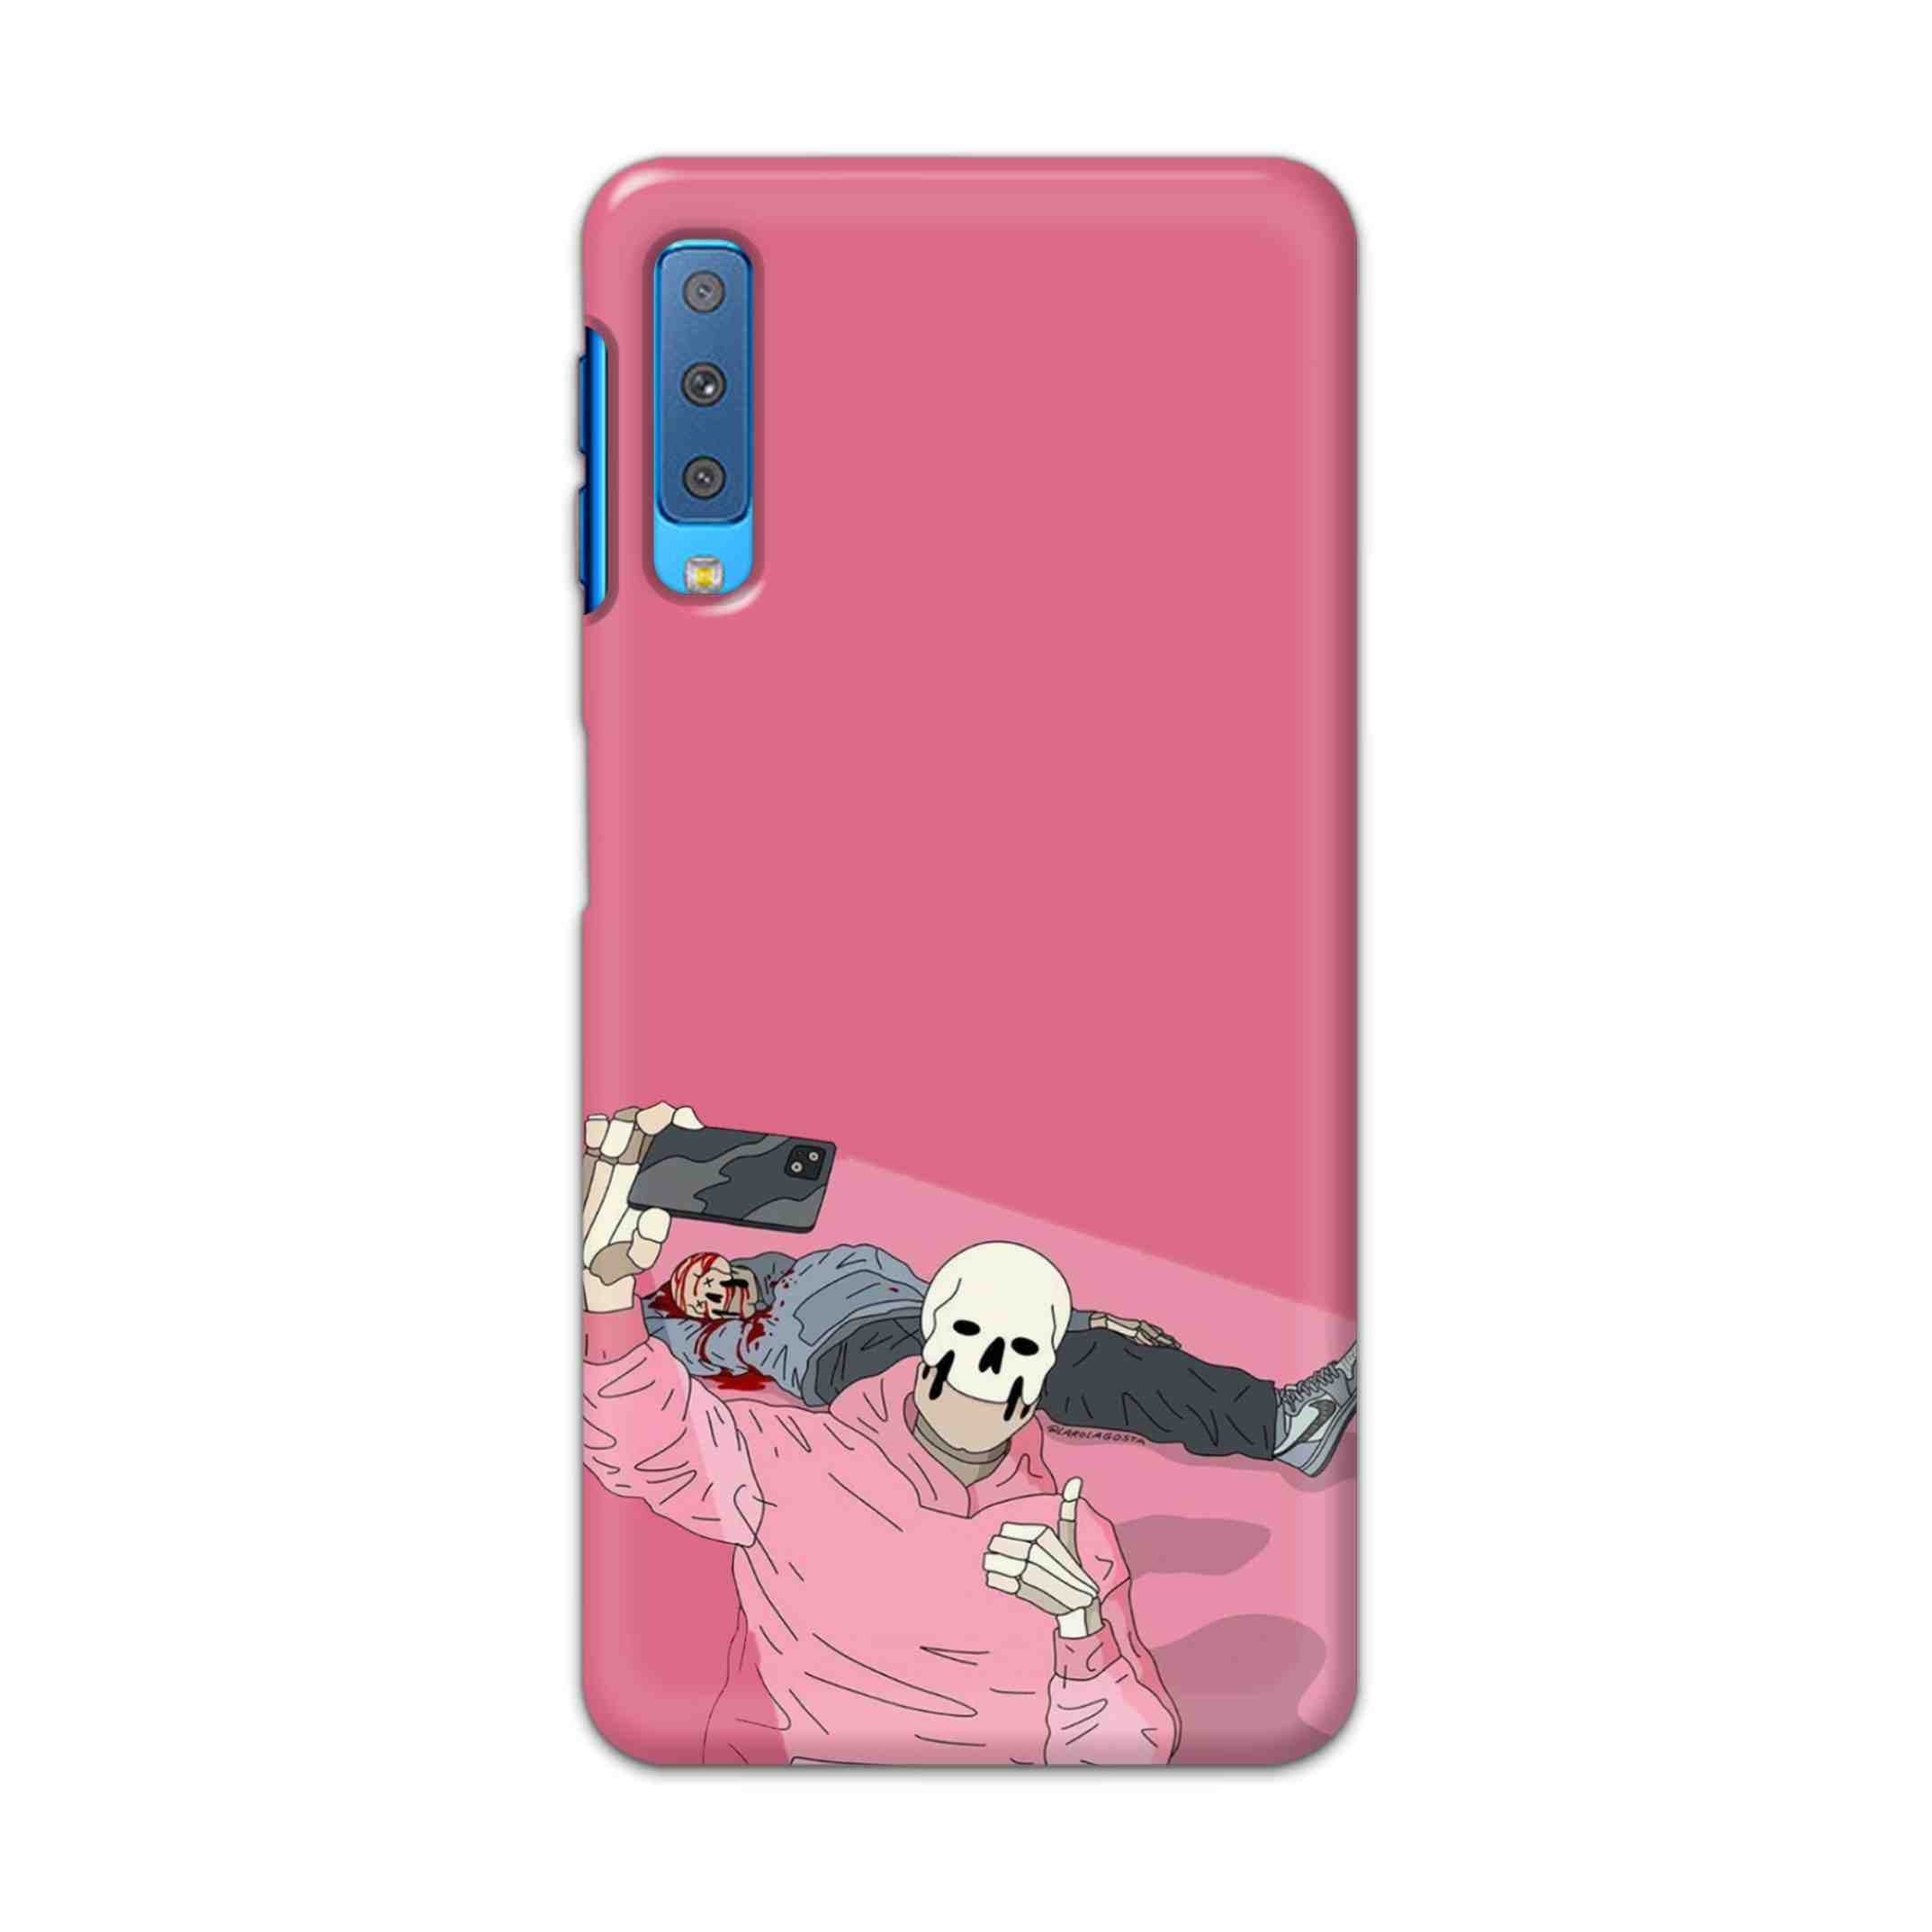 Buy Selfie Hard Back Mobile Phone Case Cover For Samsung Galaxy A7 2018 Online